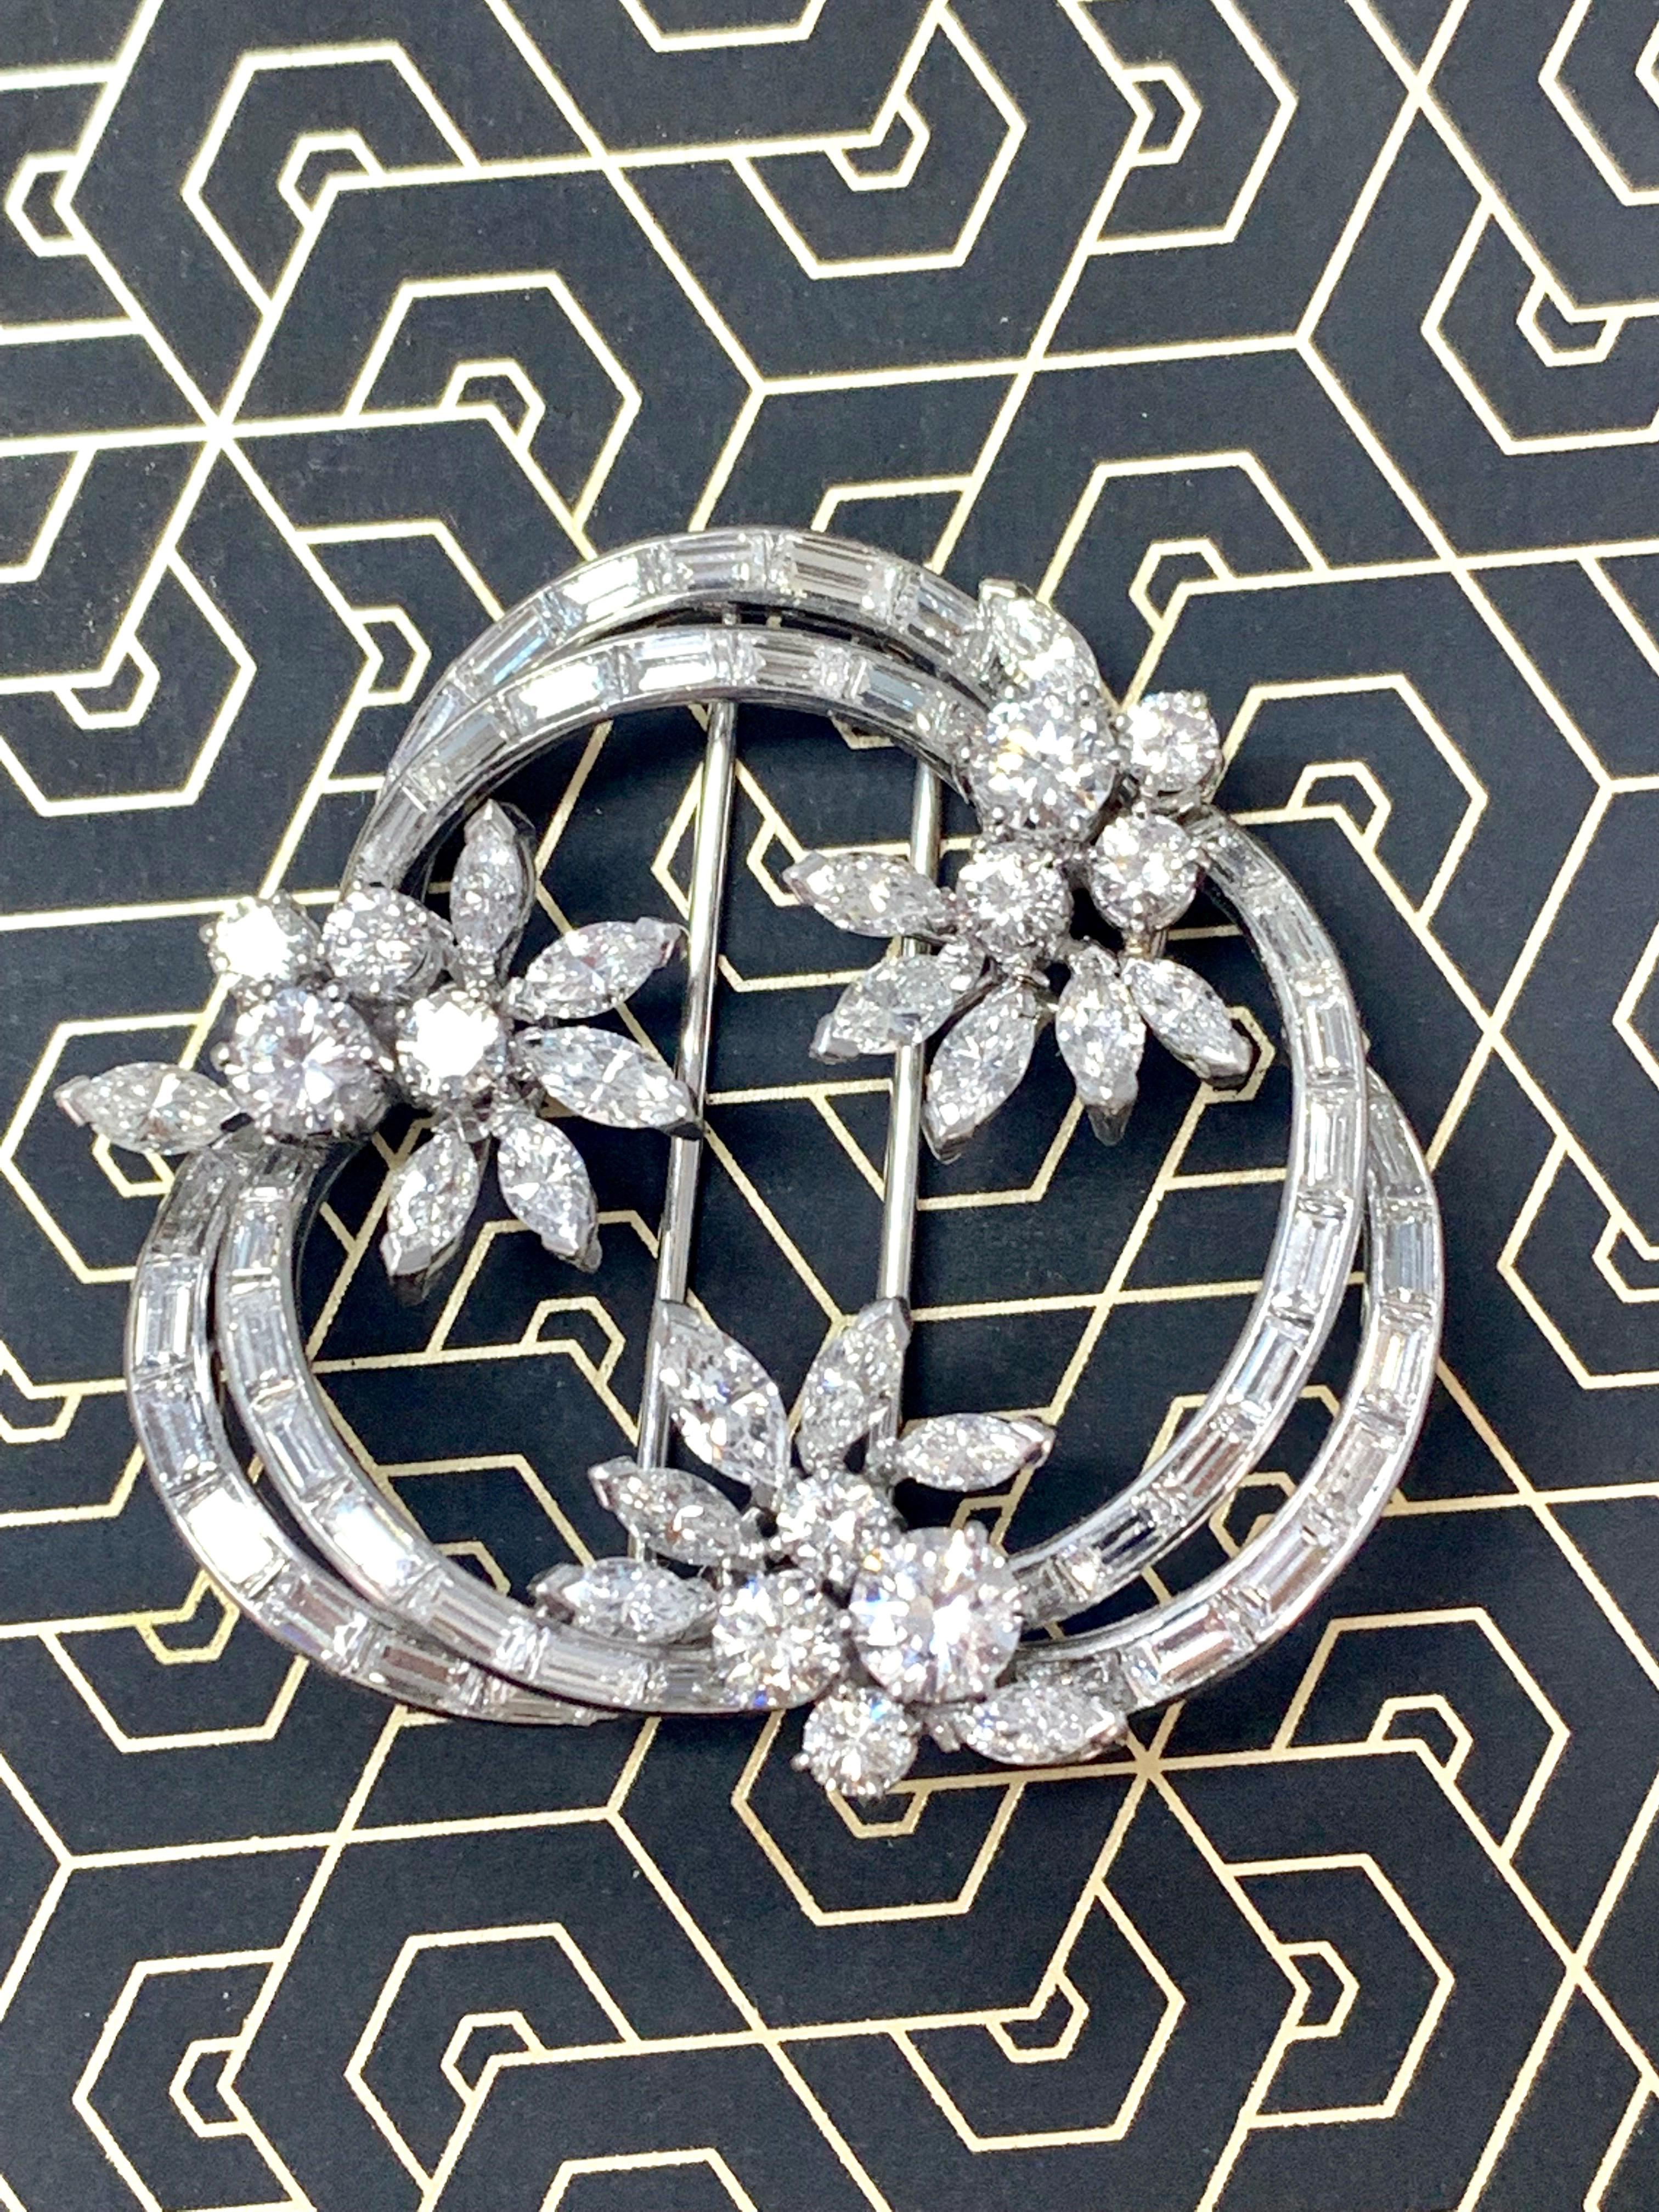 Gorgeous 12 carat diamond broach in platinum. 
The details are as follows : 
Diamond weight : 12 carat ( G color and VS 2 clarity ) 
Metal : platinum 
Measurements : 1.70